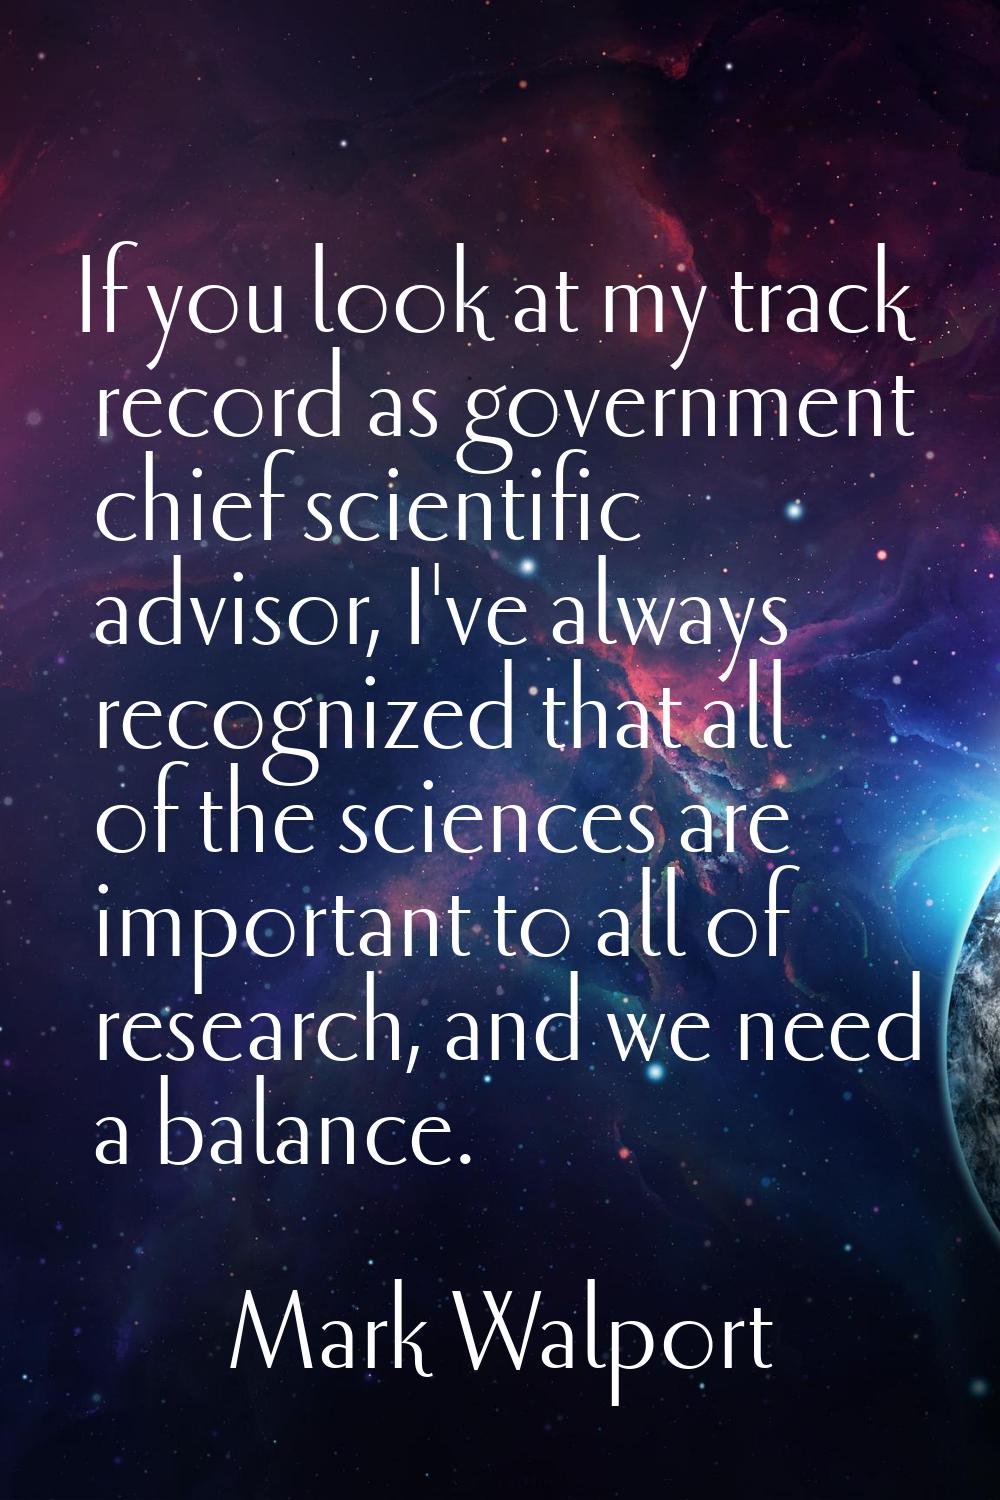 If you look at my track record as government chief scientific advisor, I've always recognized that 